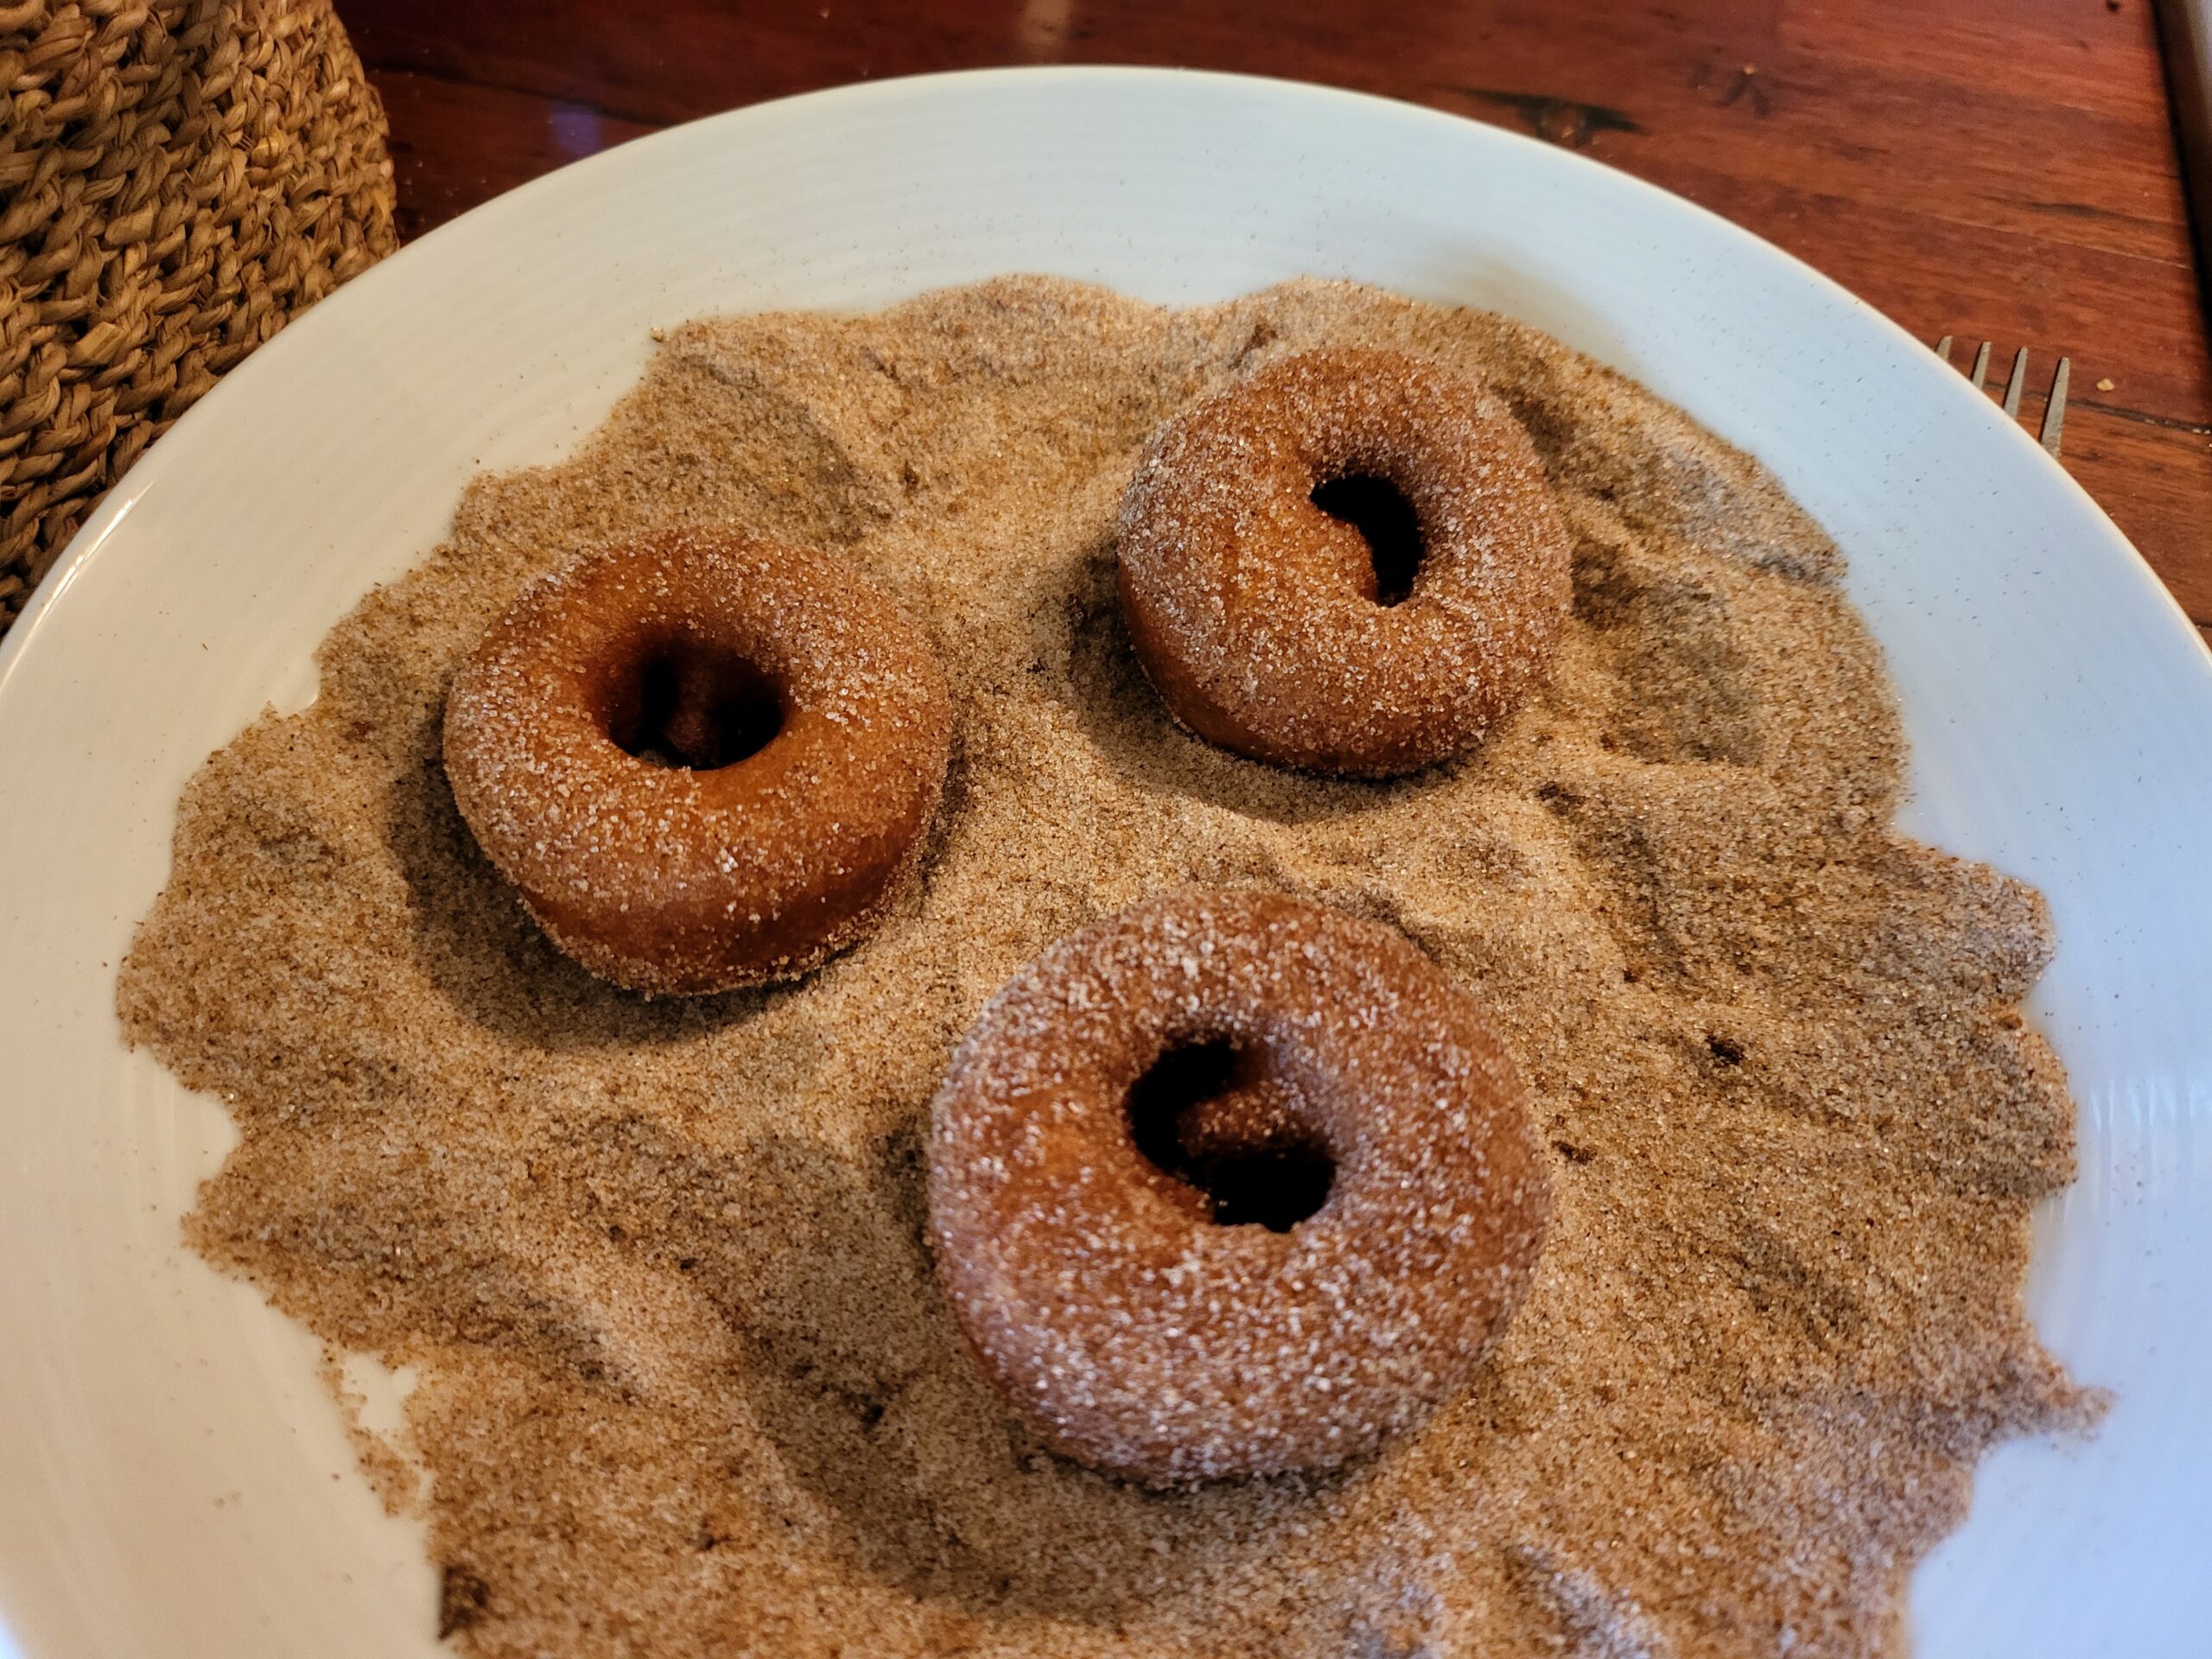 three ring donuts covered in sugar and cinnamon on a plate